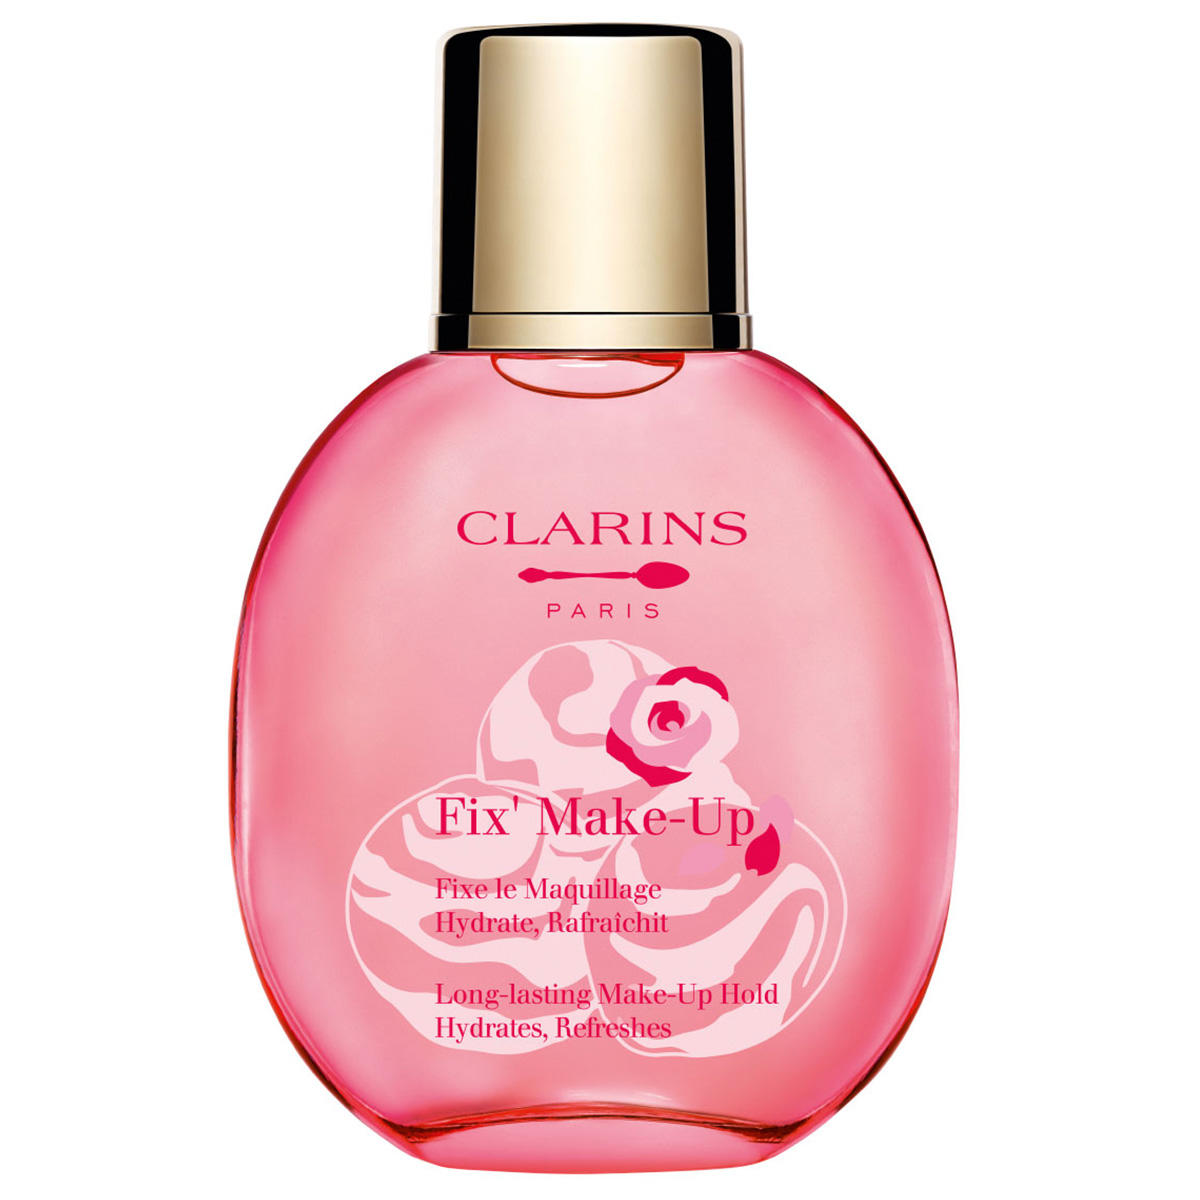 CLARINS Fix' Make-Up Limited Edition 50 ml - 1